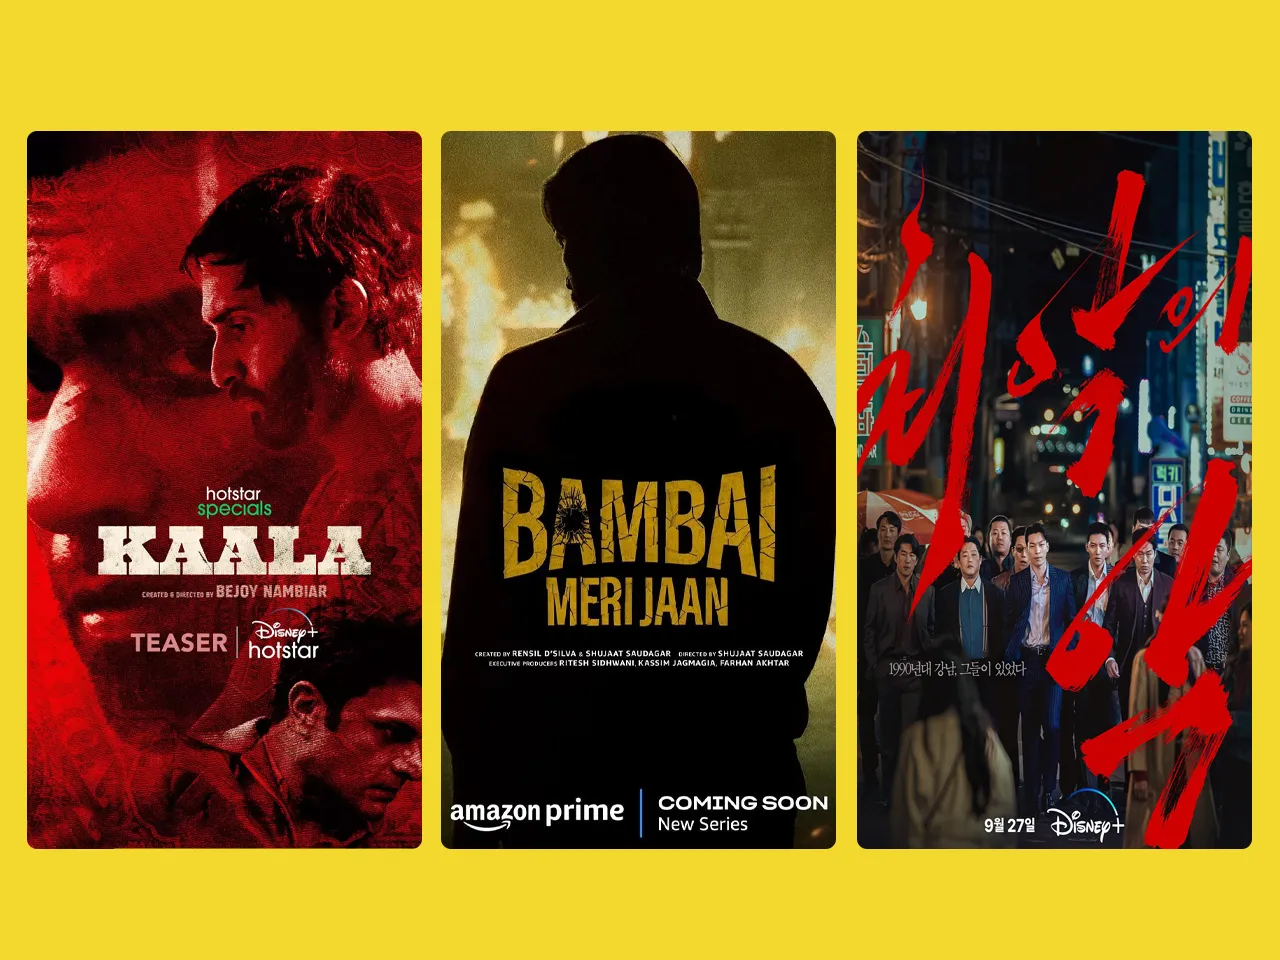 From Bambai Meri Jaan to The Freelancer, Prime Video and Disney+Hotstar releases in September look action packed and edge of the seat entertainers!